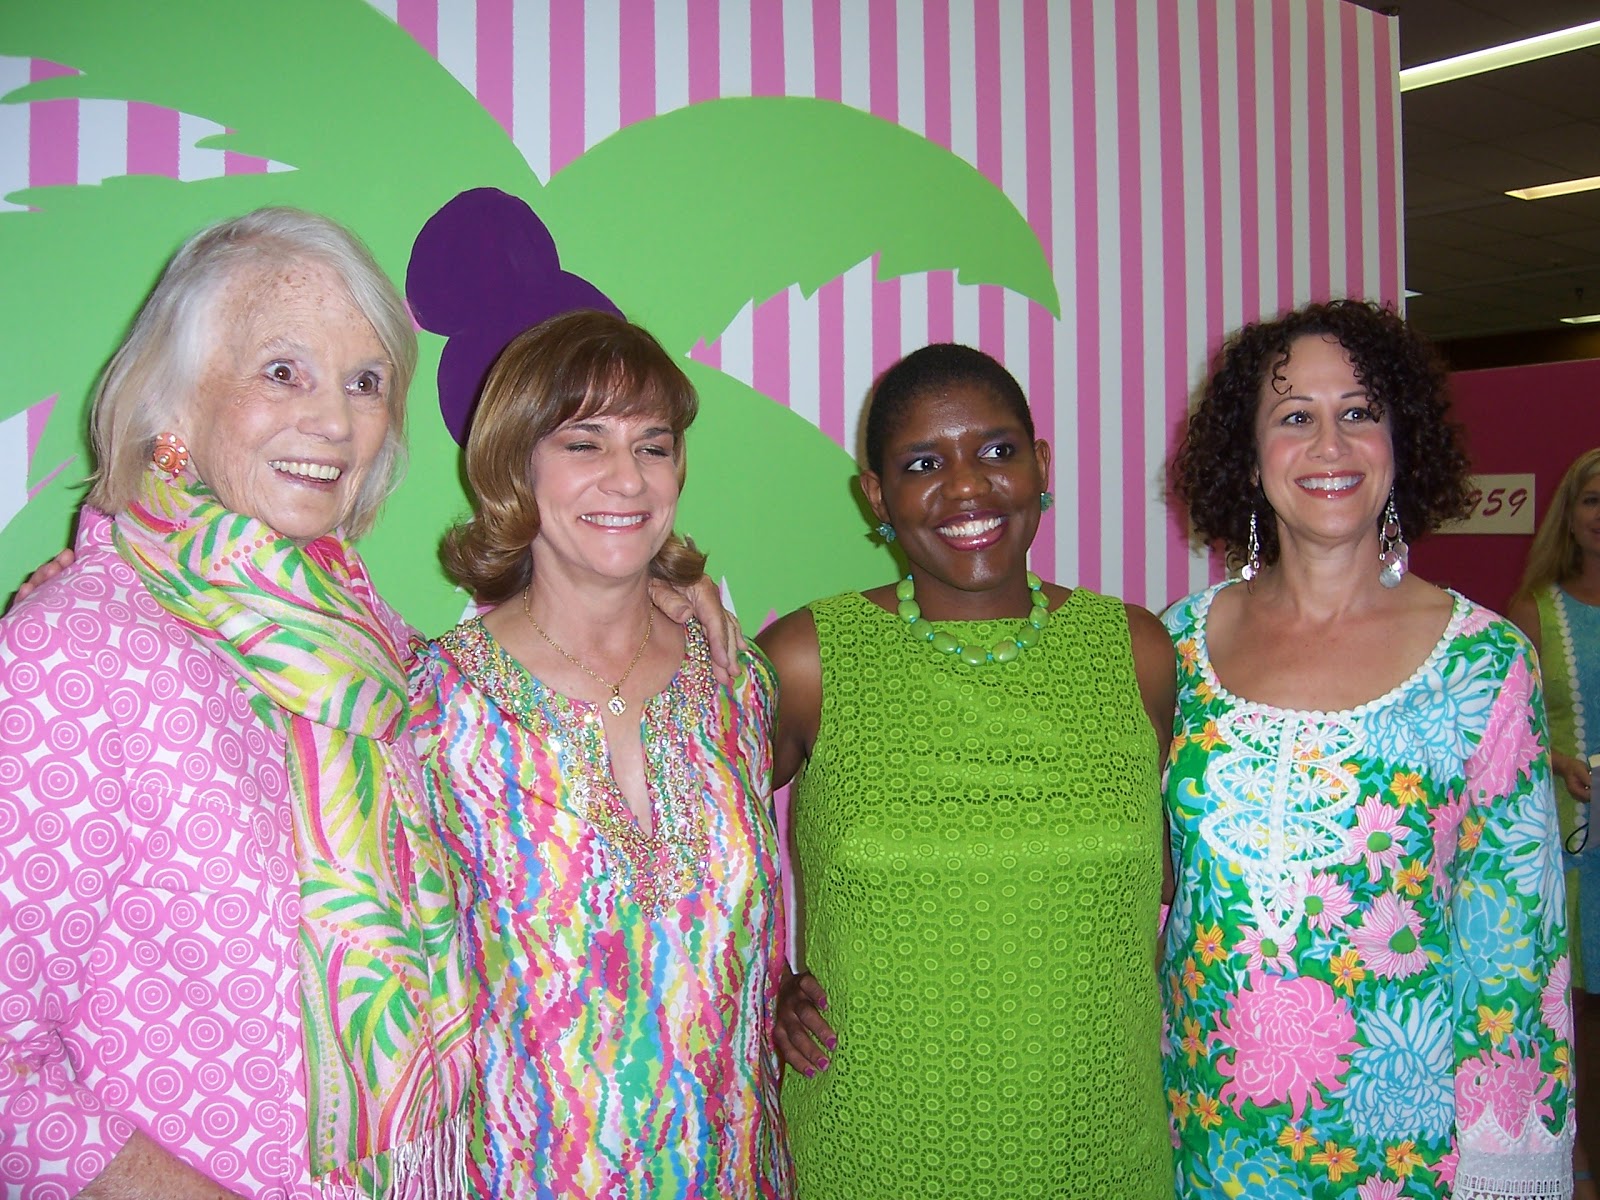 Culture Blog Lilly Pulitzer Rousseau Passes Away At Age 81 From Juice